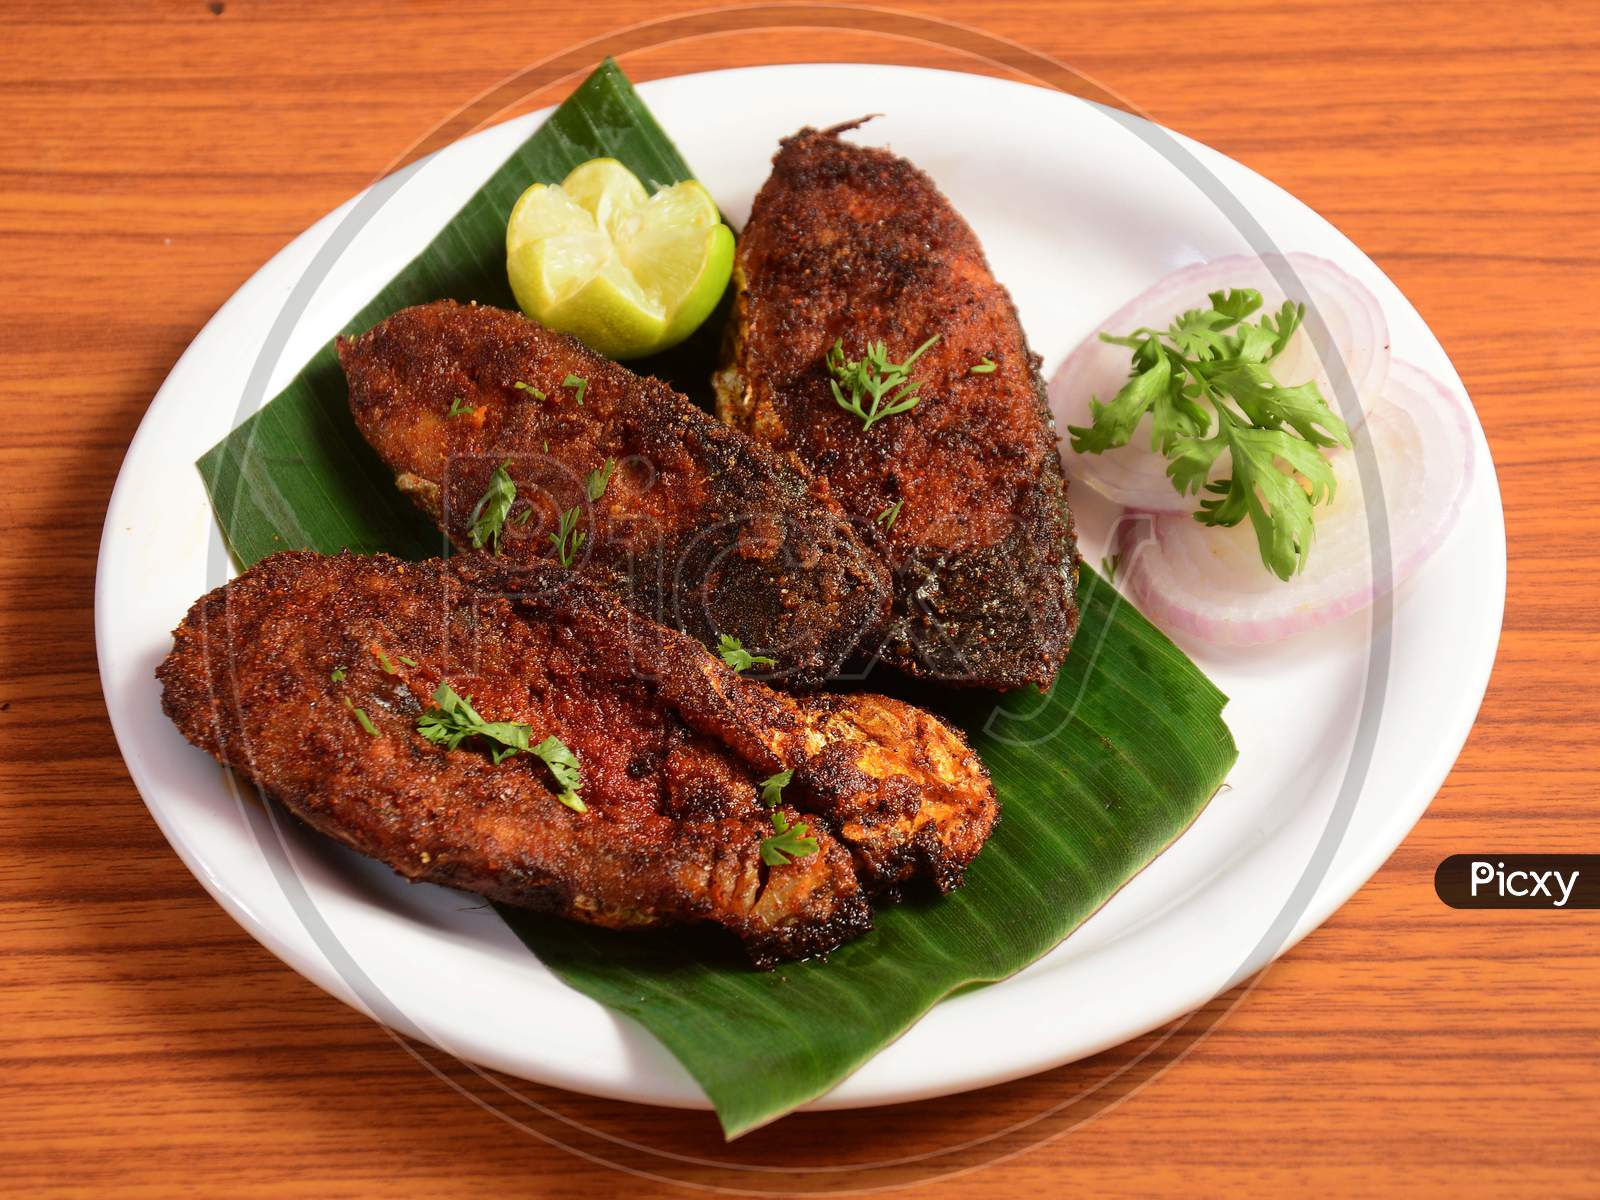 Delicious Crispy King Fish Fry Also Known As Indian Surmai, Served With Onion And Lemon Placed Over A Rustic Wooden Background,Selective Focus